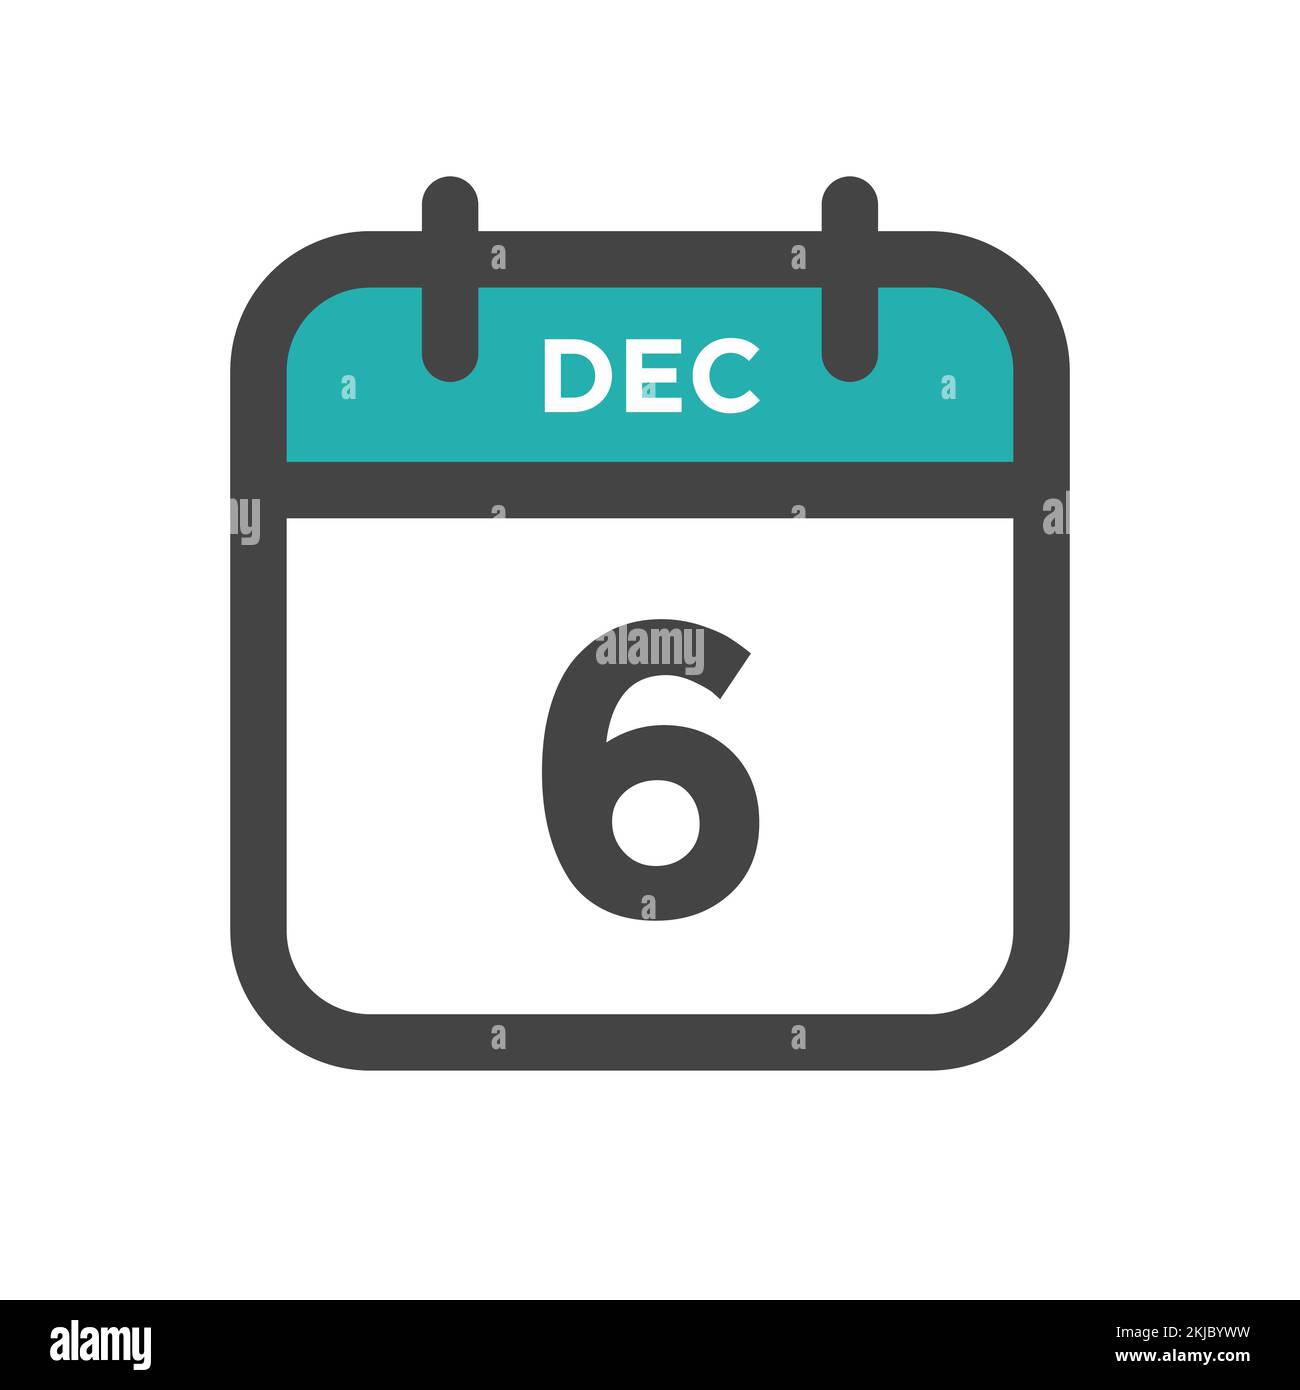 December 6 Calendar Day or Calender Date for Deadline and Appointment Stock Vector